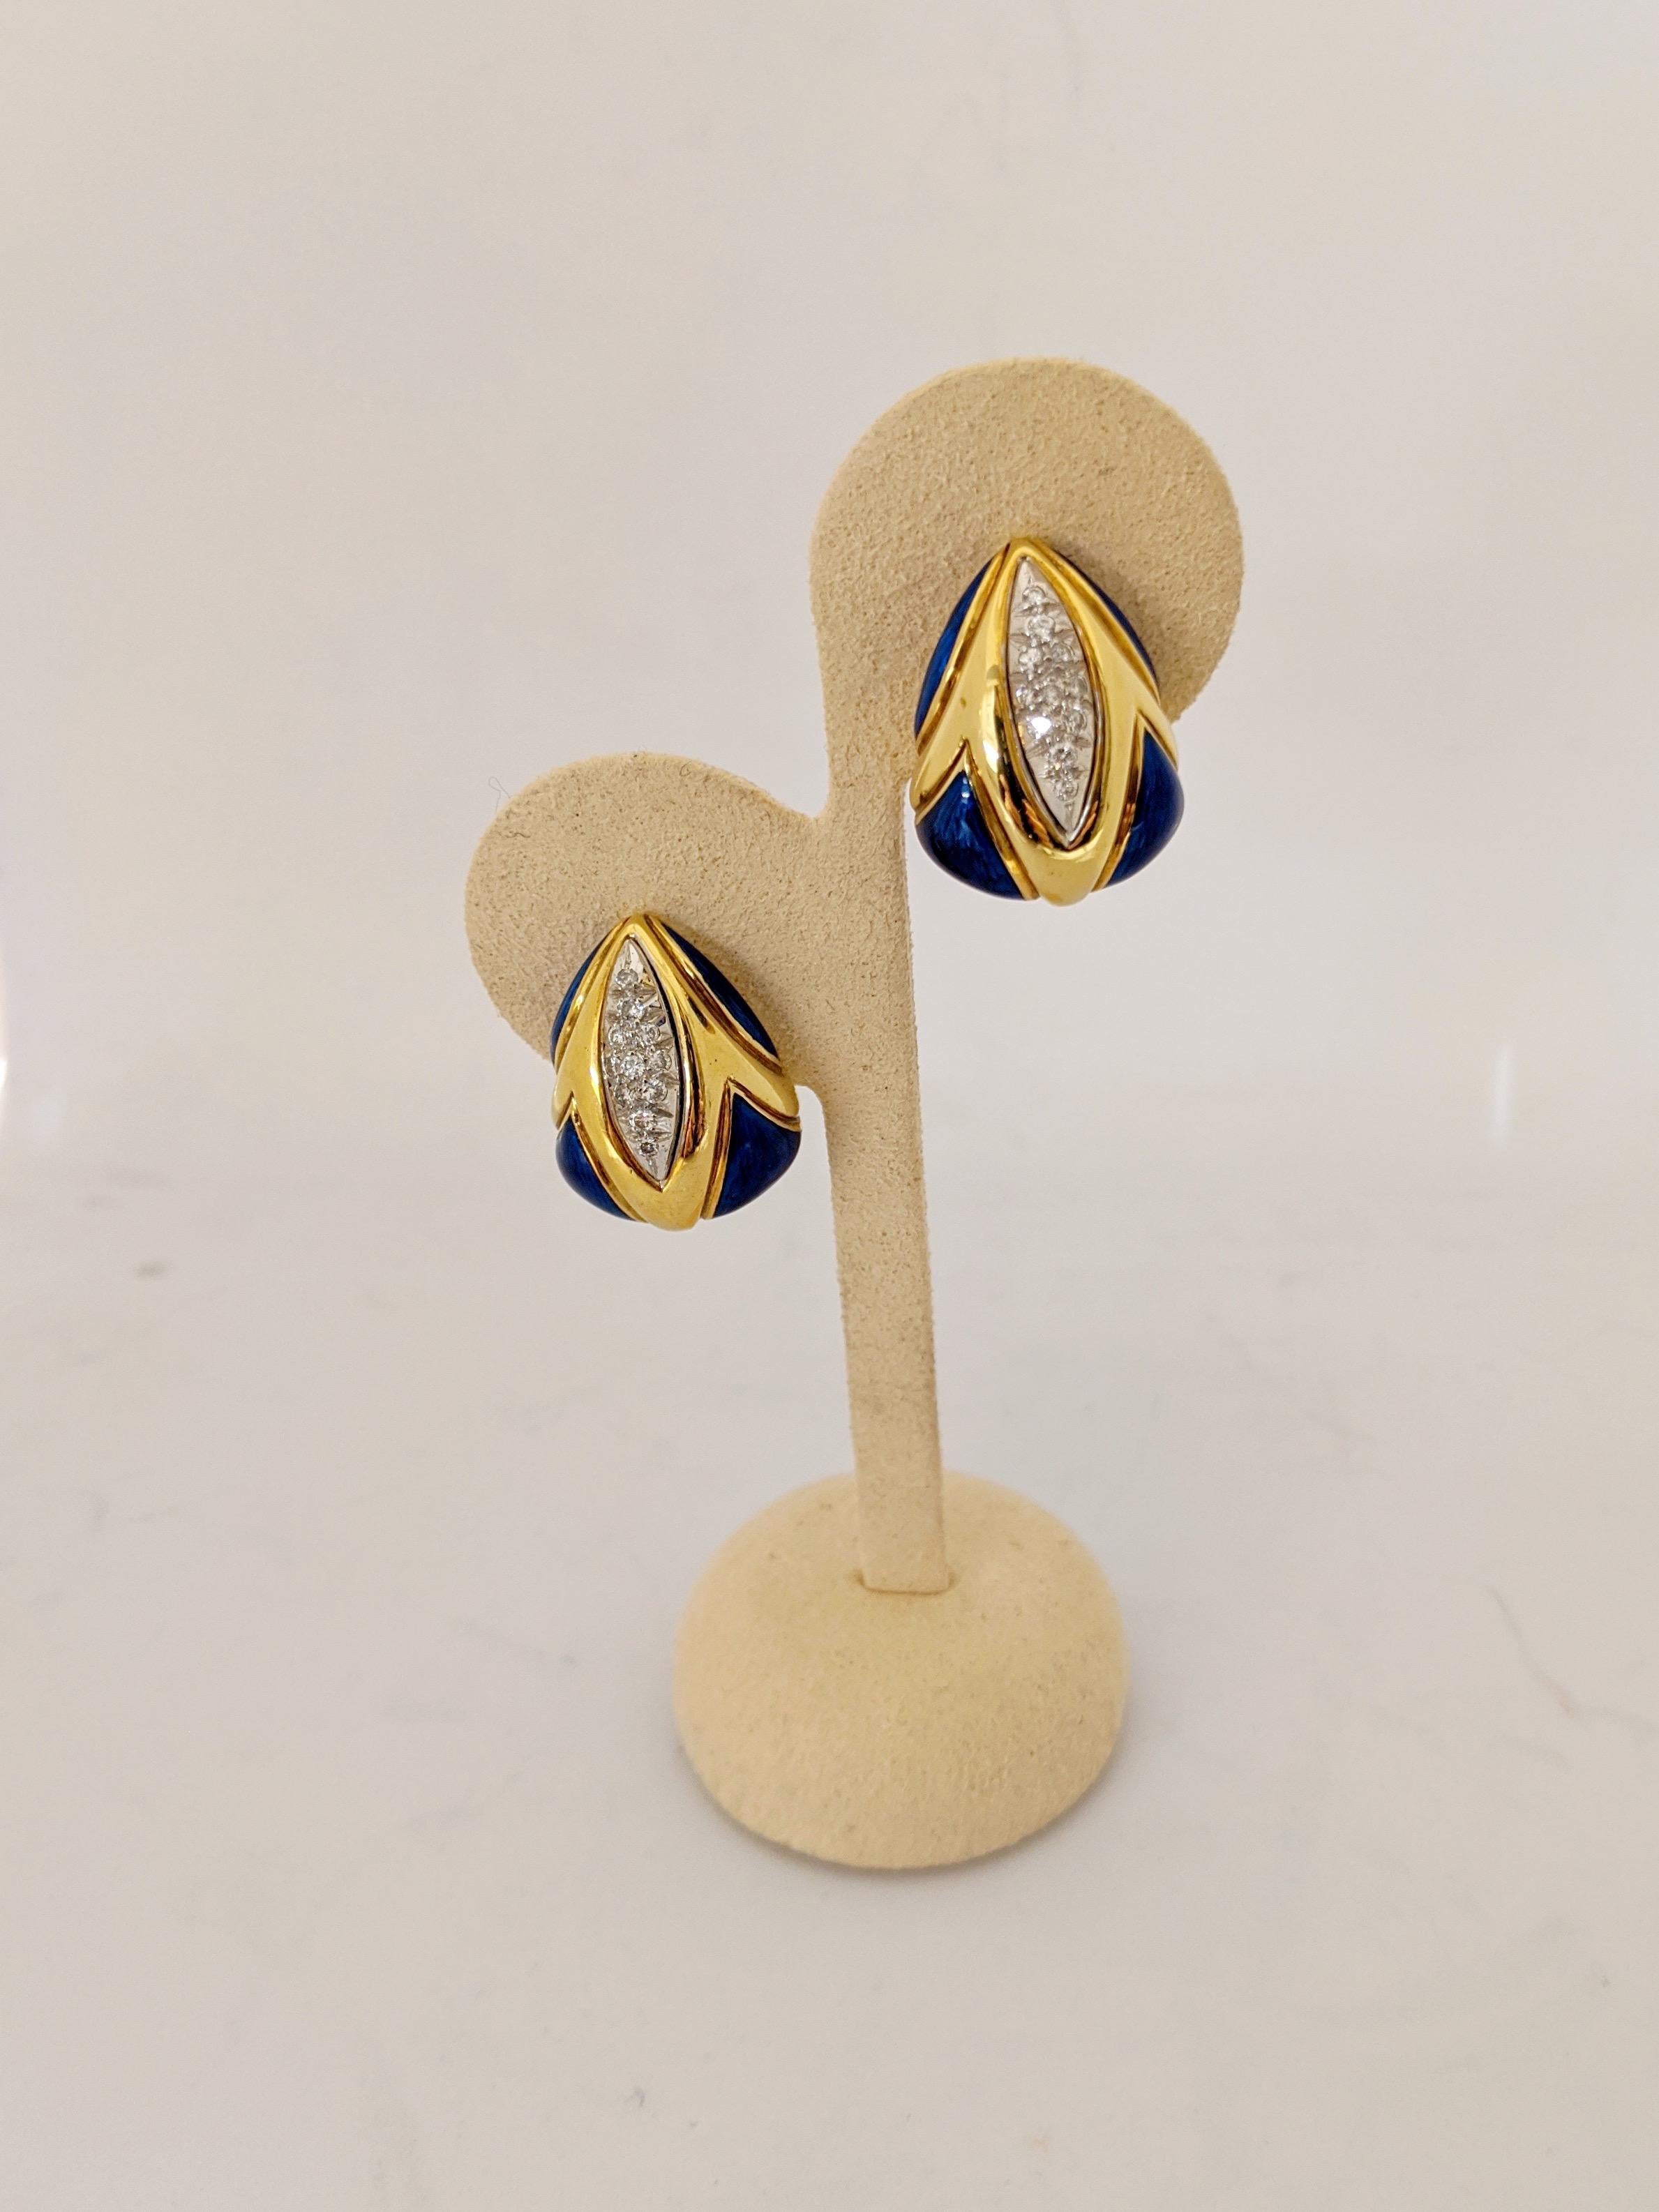 These 18 karat yellow gold earrings are a triangular shape. The earrings are set with pave diamonds and polished sections of Lapis in geometric shapes. They have a french clip back and are suitable for pierced and non pierced wearers. They measure